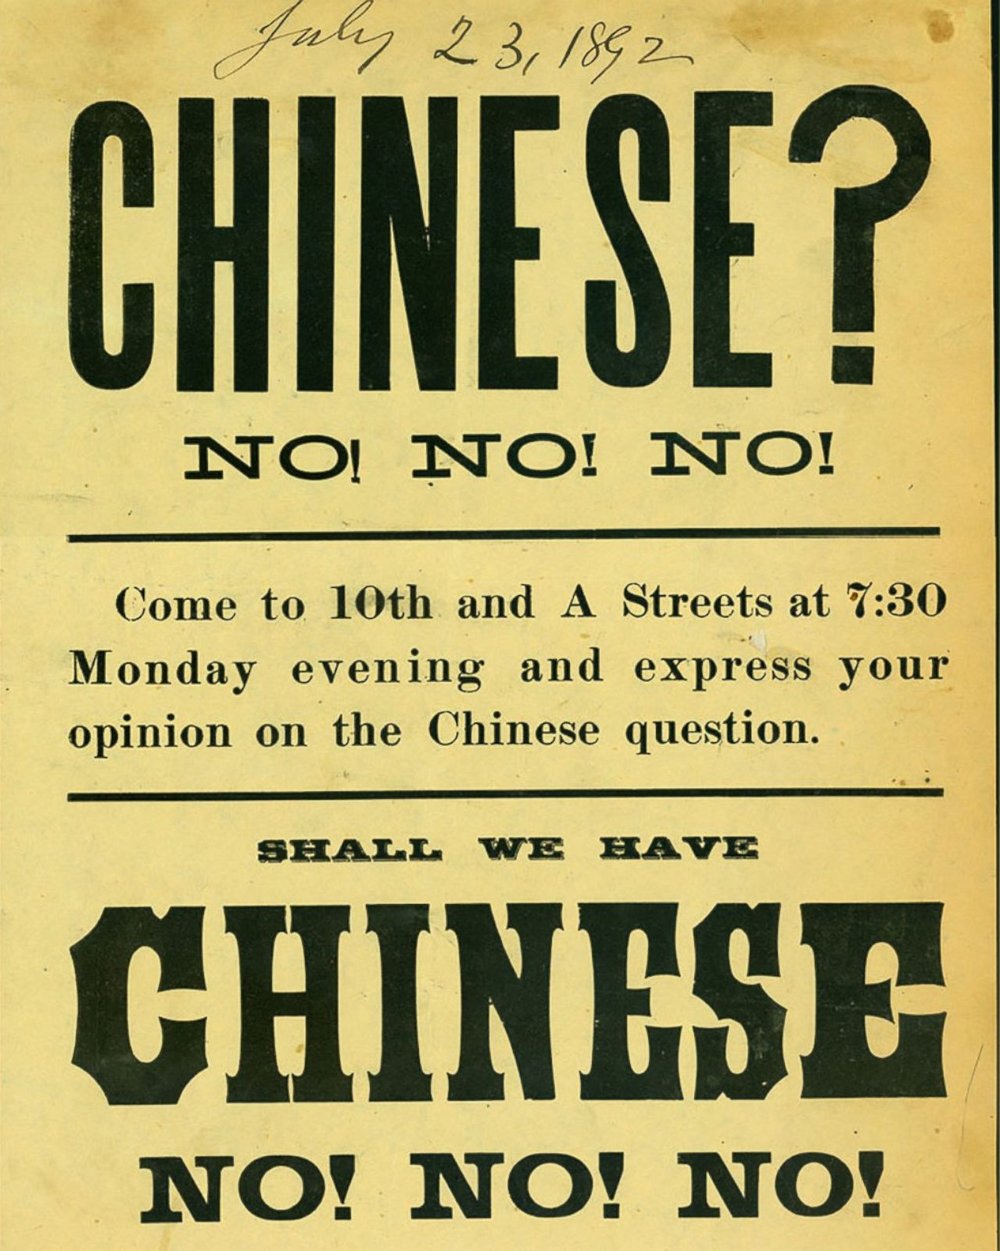  Poster for an anti-Chinese rally in Takoma, WA, c. 1892  via  